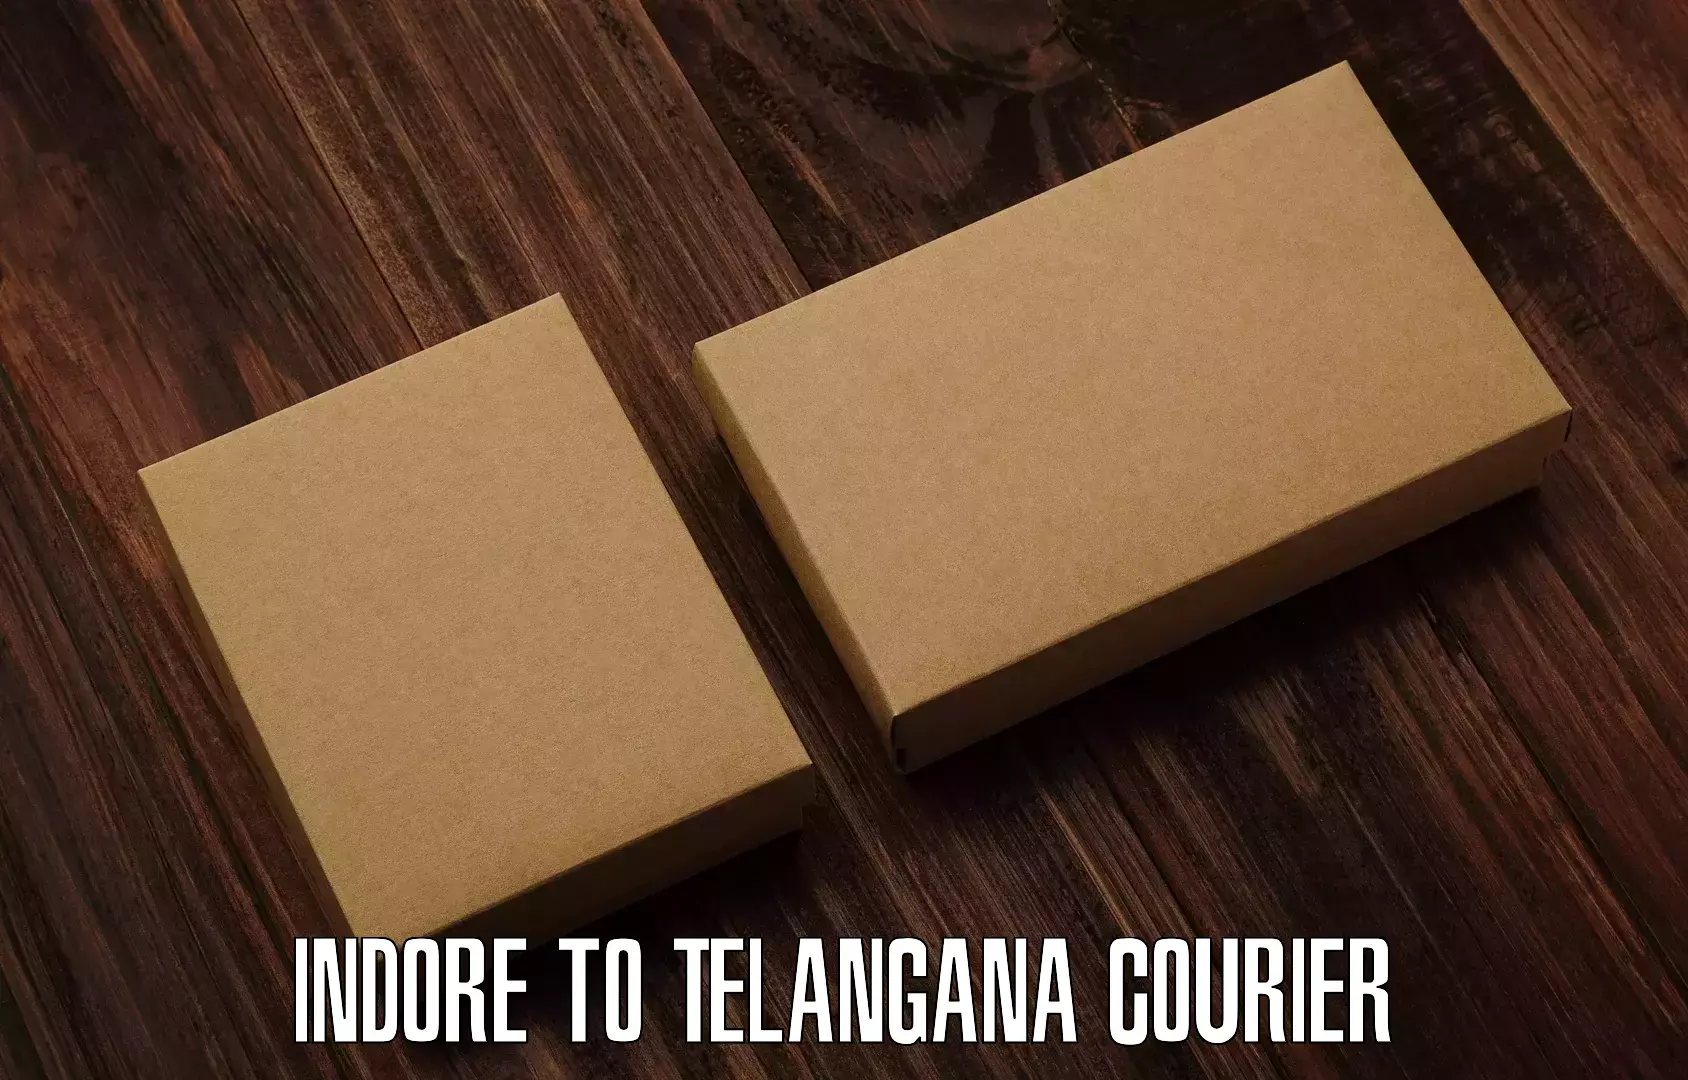 Lightweight parcel options Indore to Gollapalli